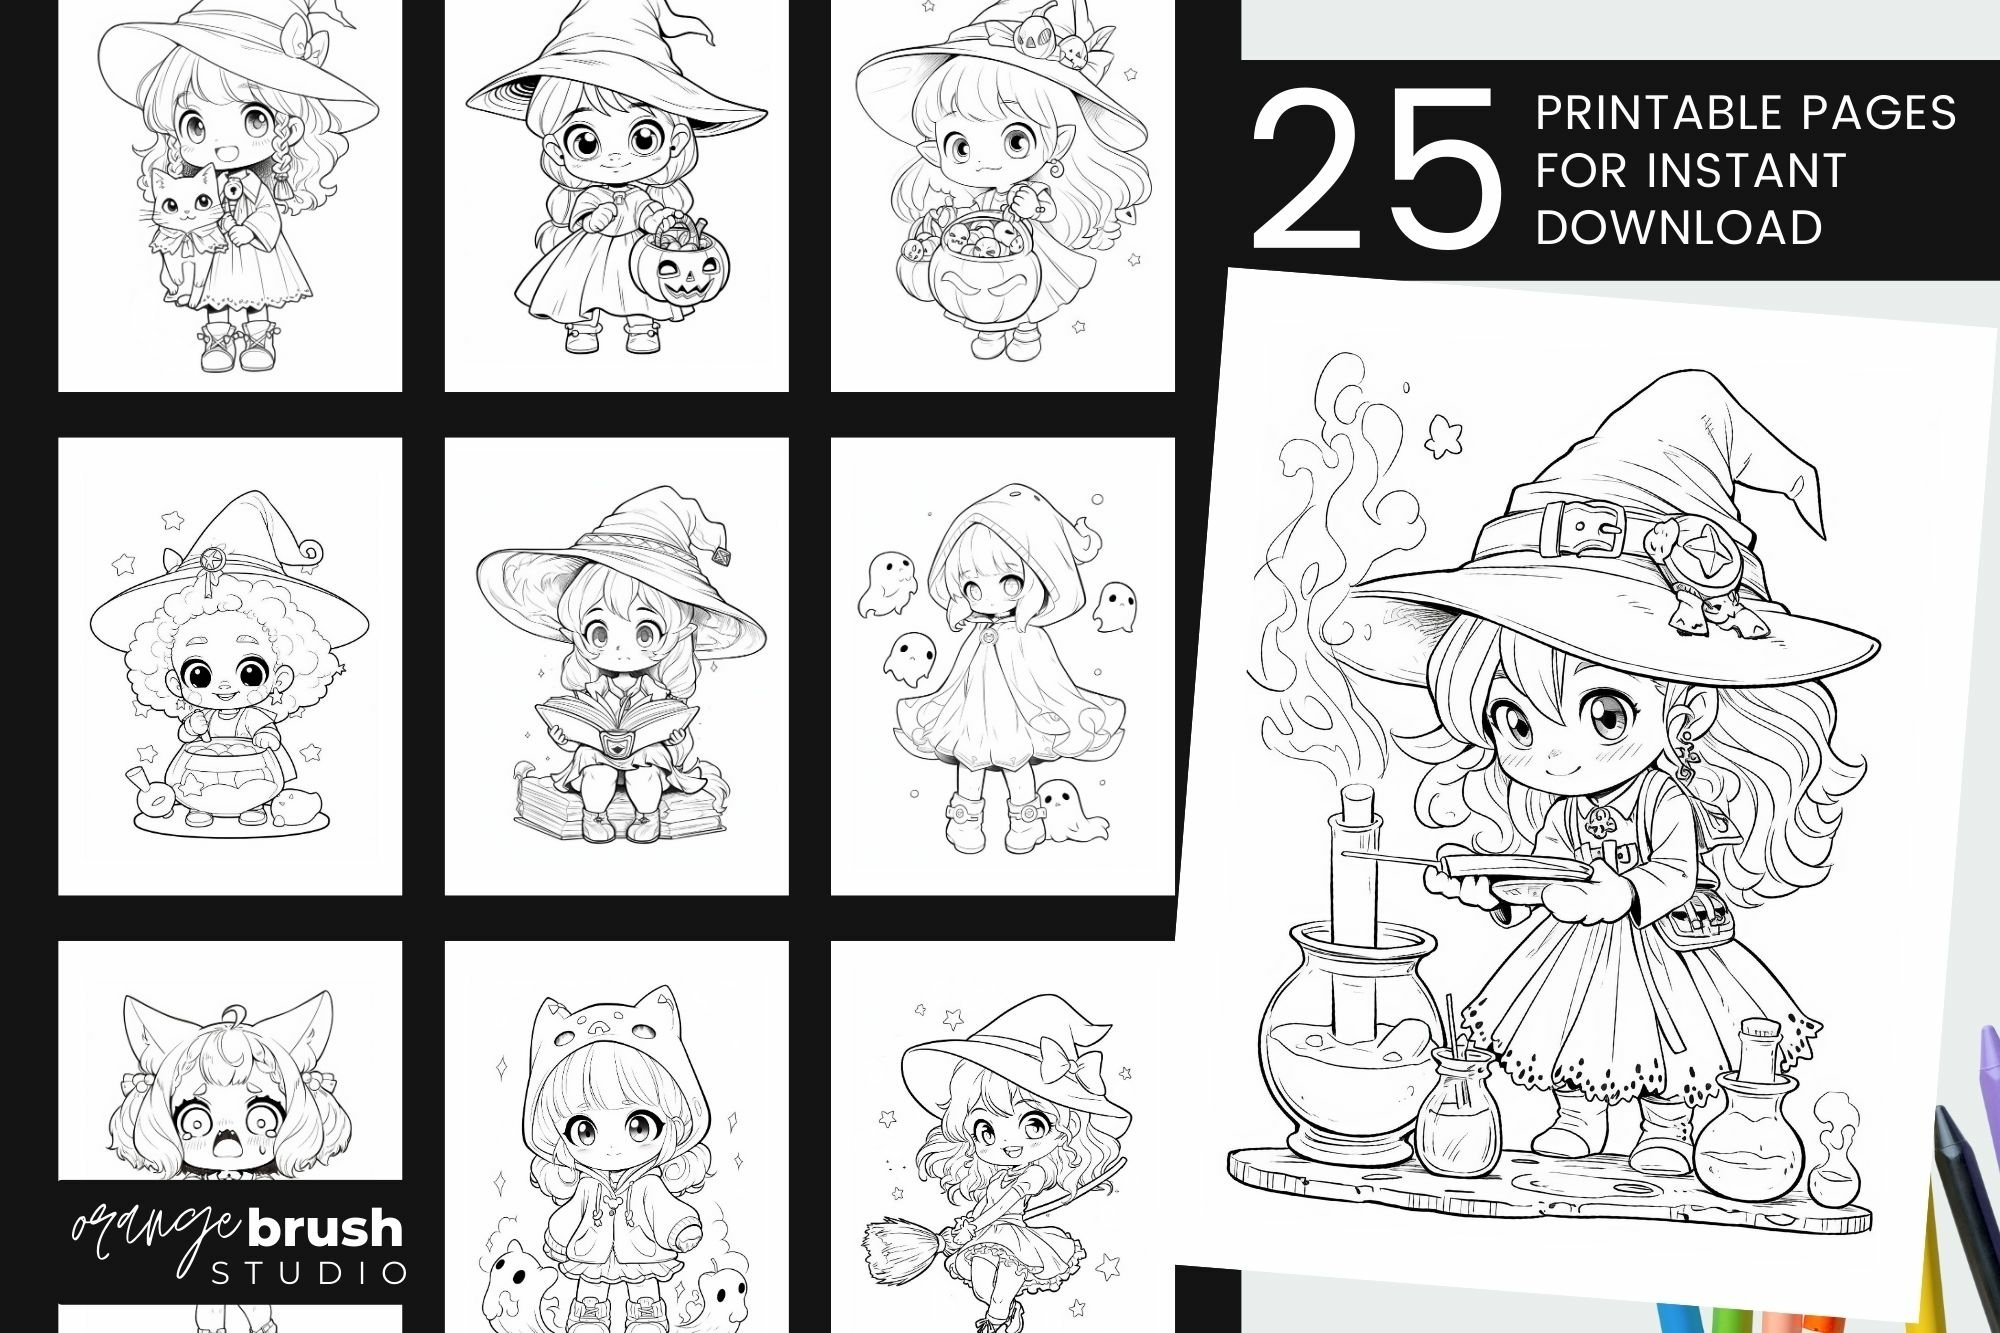 Chibi witch halloween coloring book for kids printable pdf